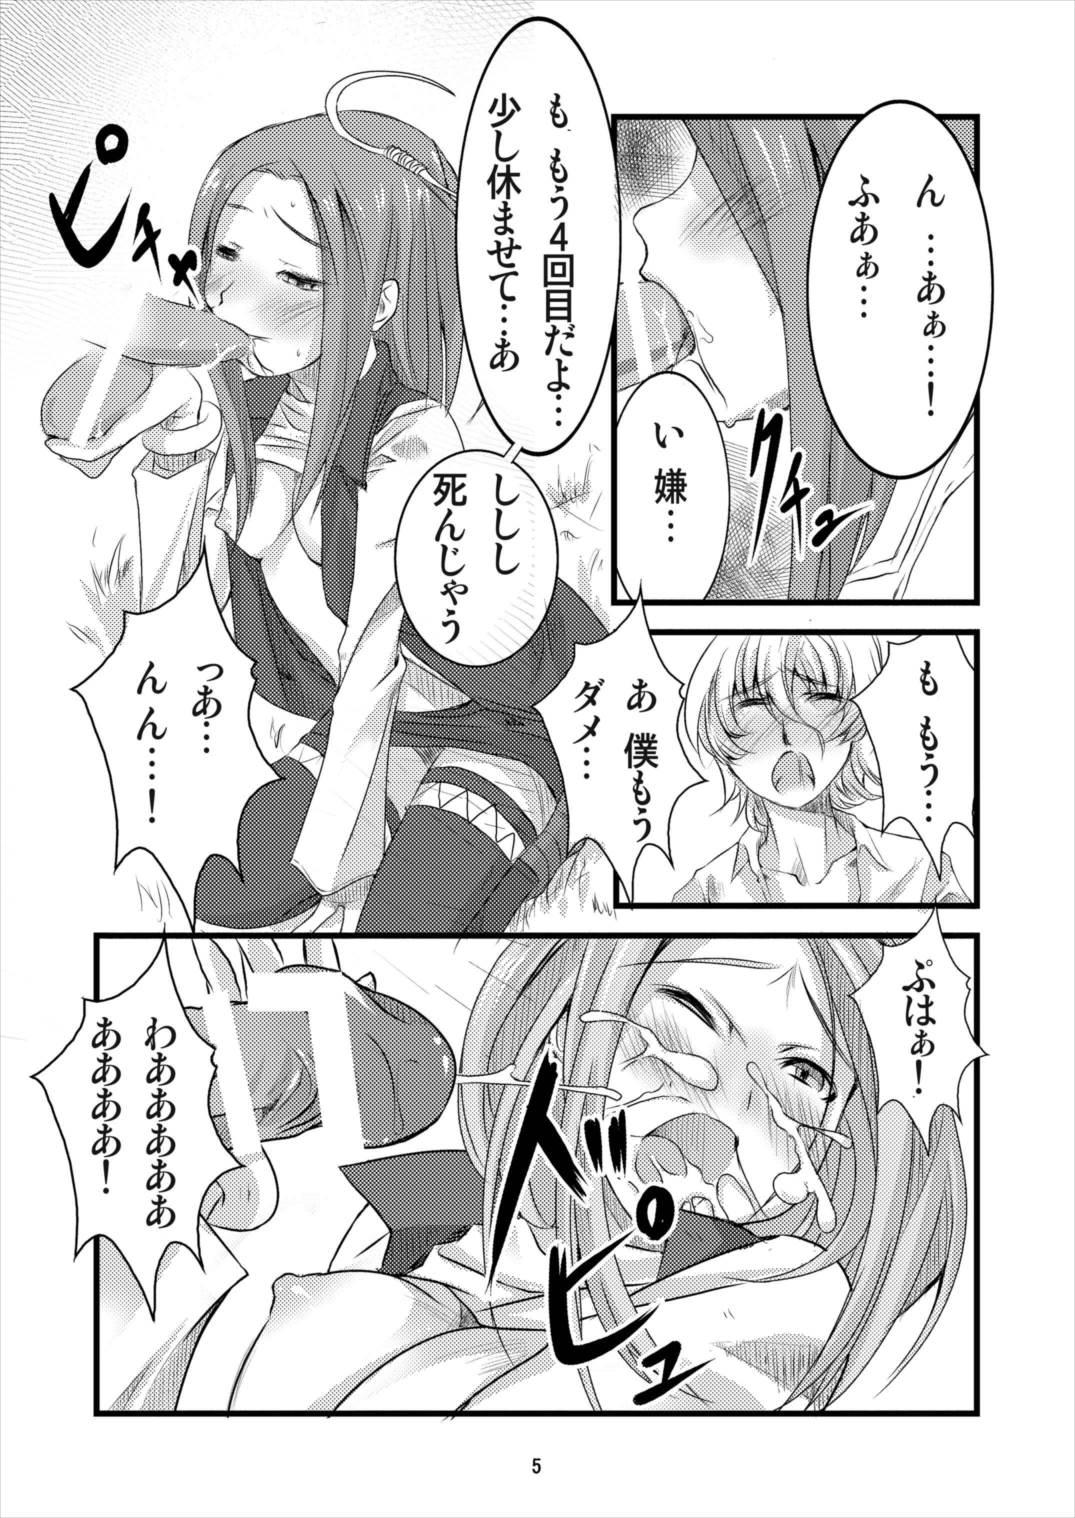 Dick Suck 8:45 - Suite precure Woman Fucking - Page 5